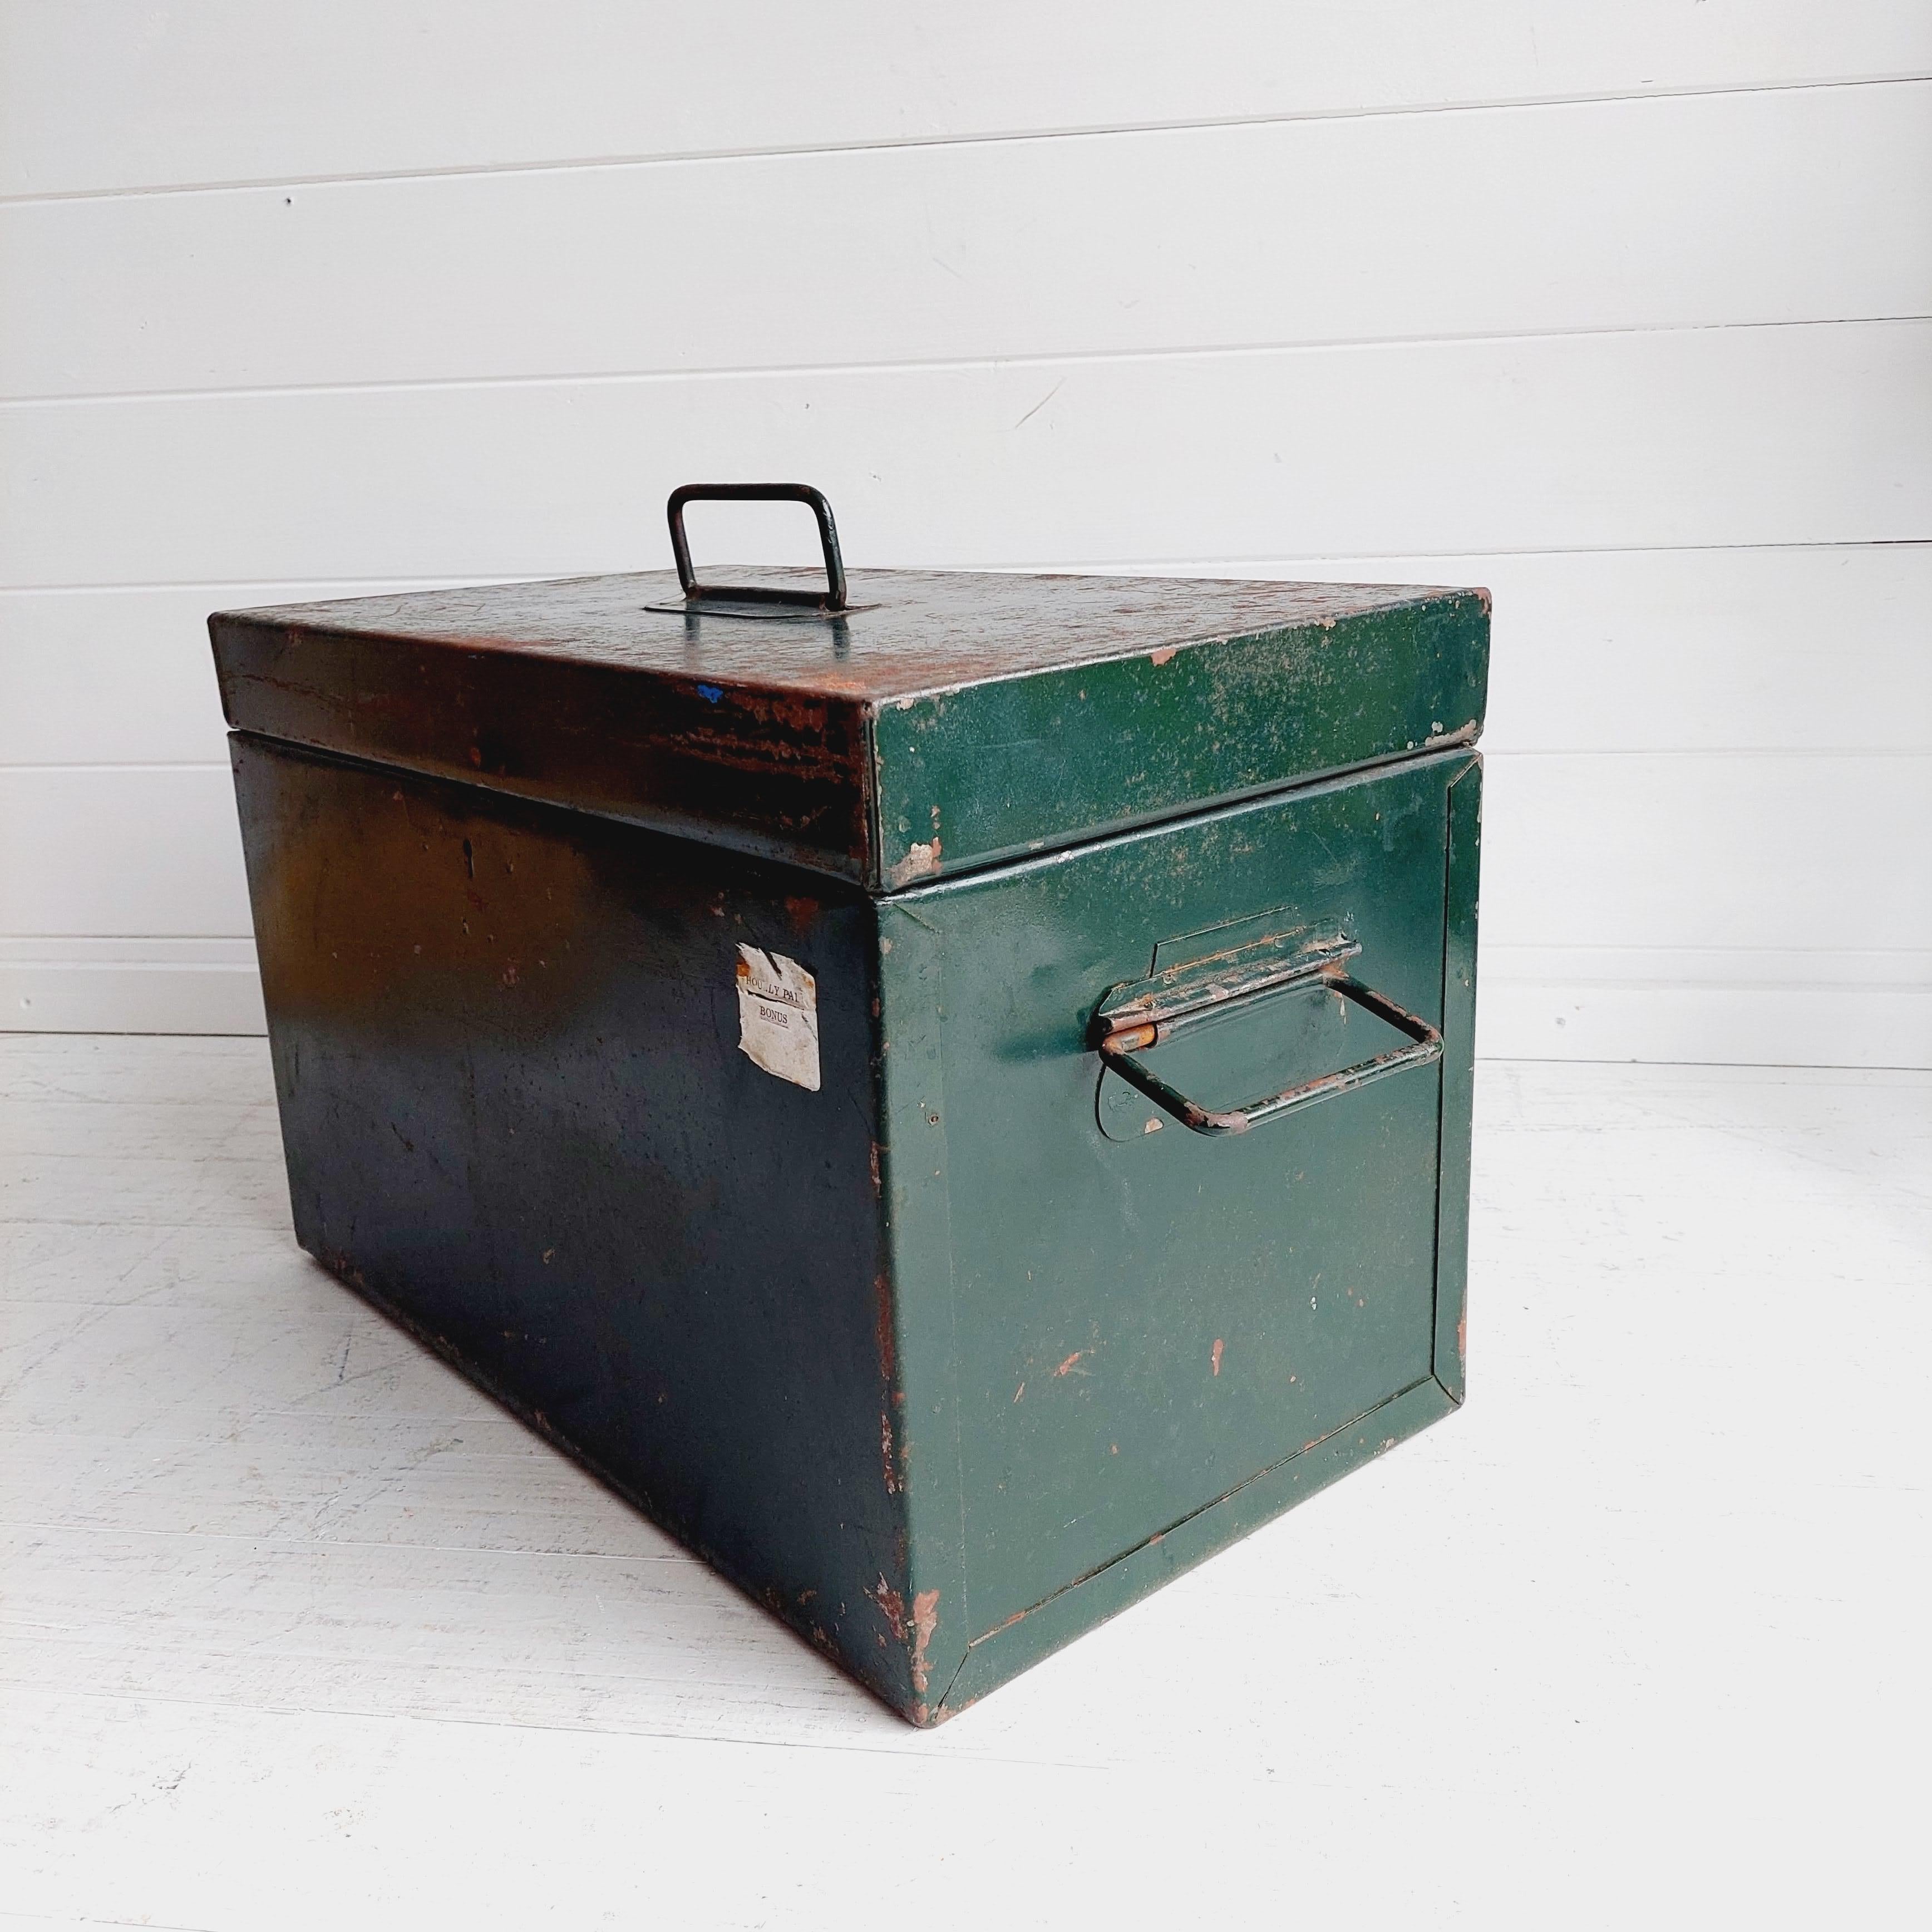 European Industrial Vintage Green Steel Trunk Chest Strong Box with Distressed Paint, 50s